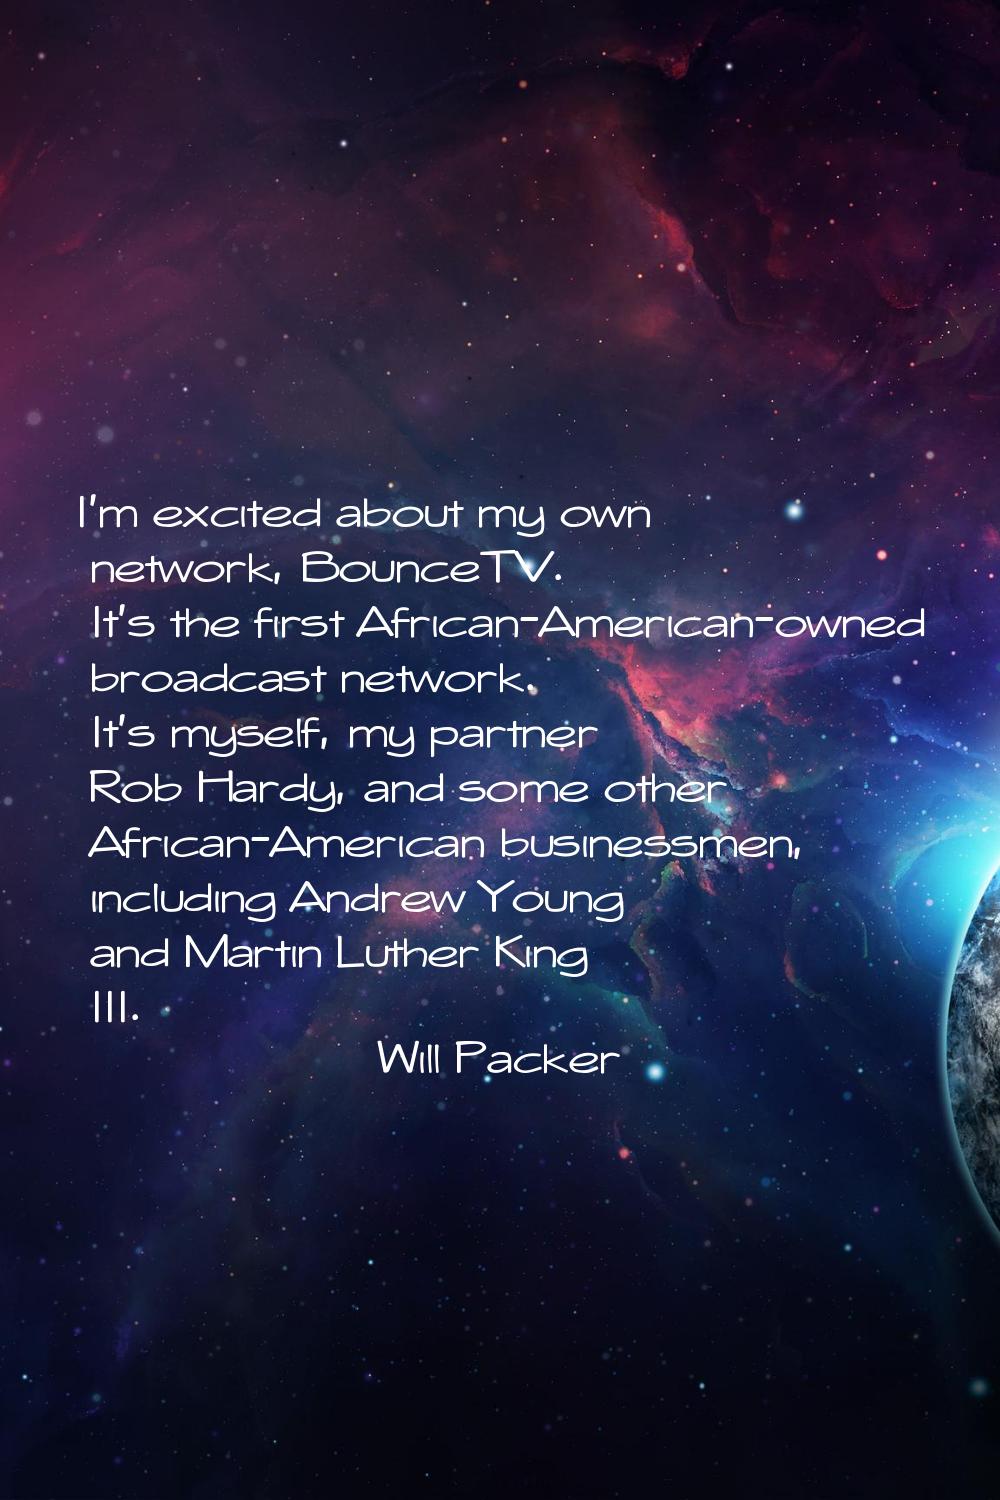 I'm excited about my own network, BounceTV. It's the first African-American-owned broadcast network